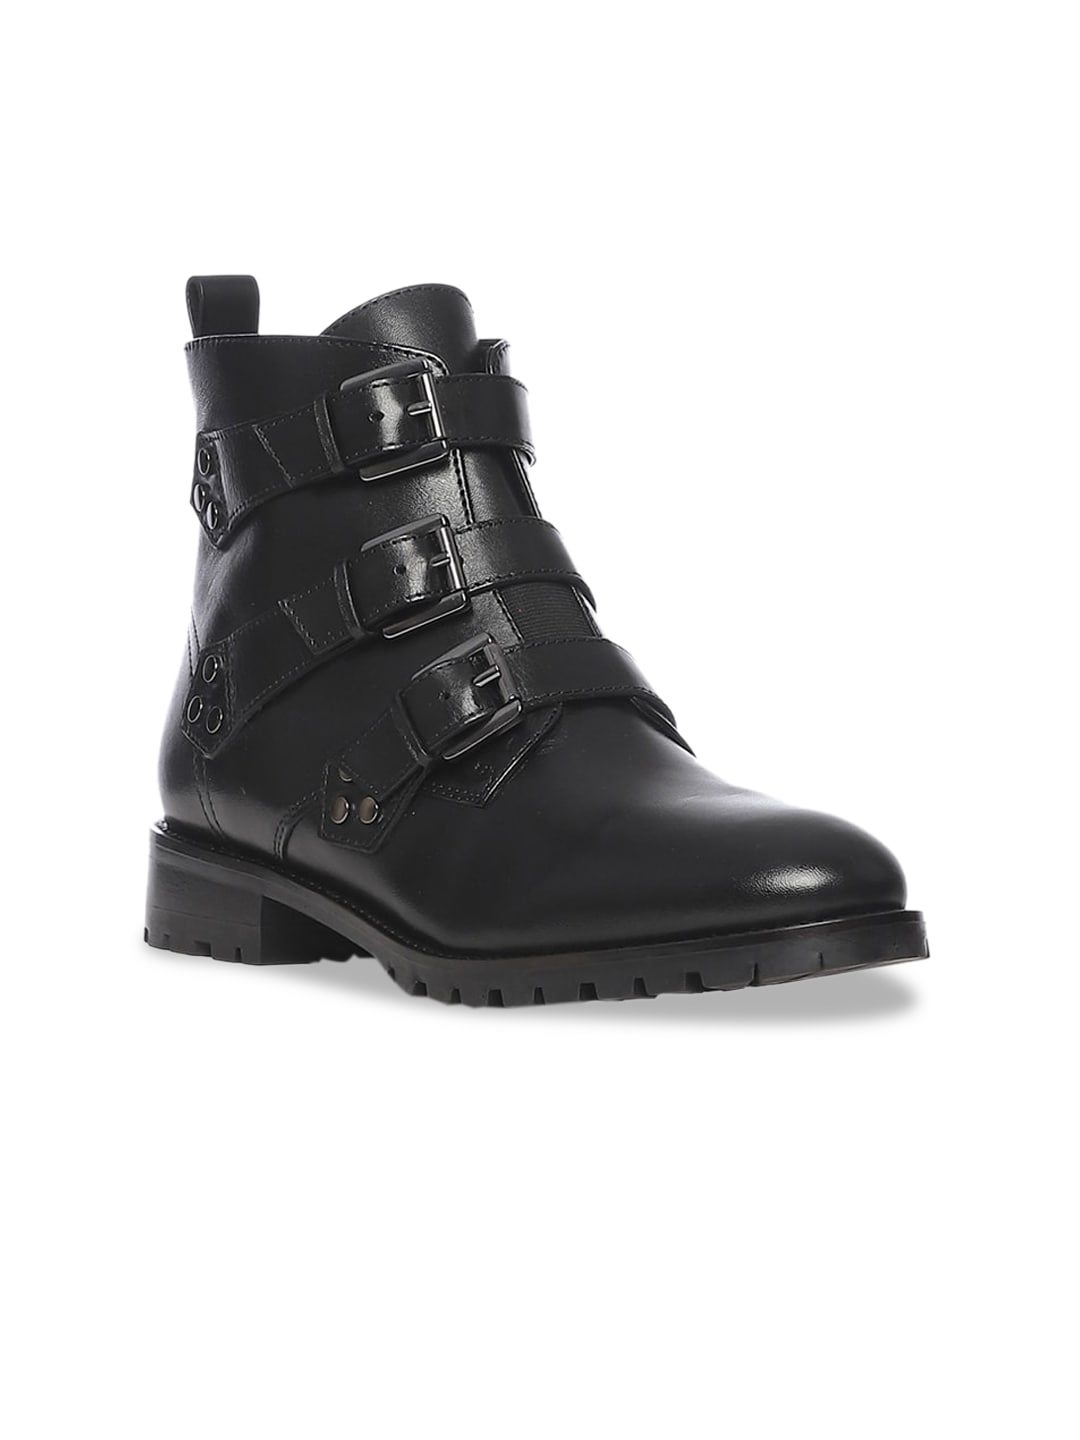 Saint G Black Multi Buckle Leather Boots Price in India